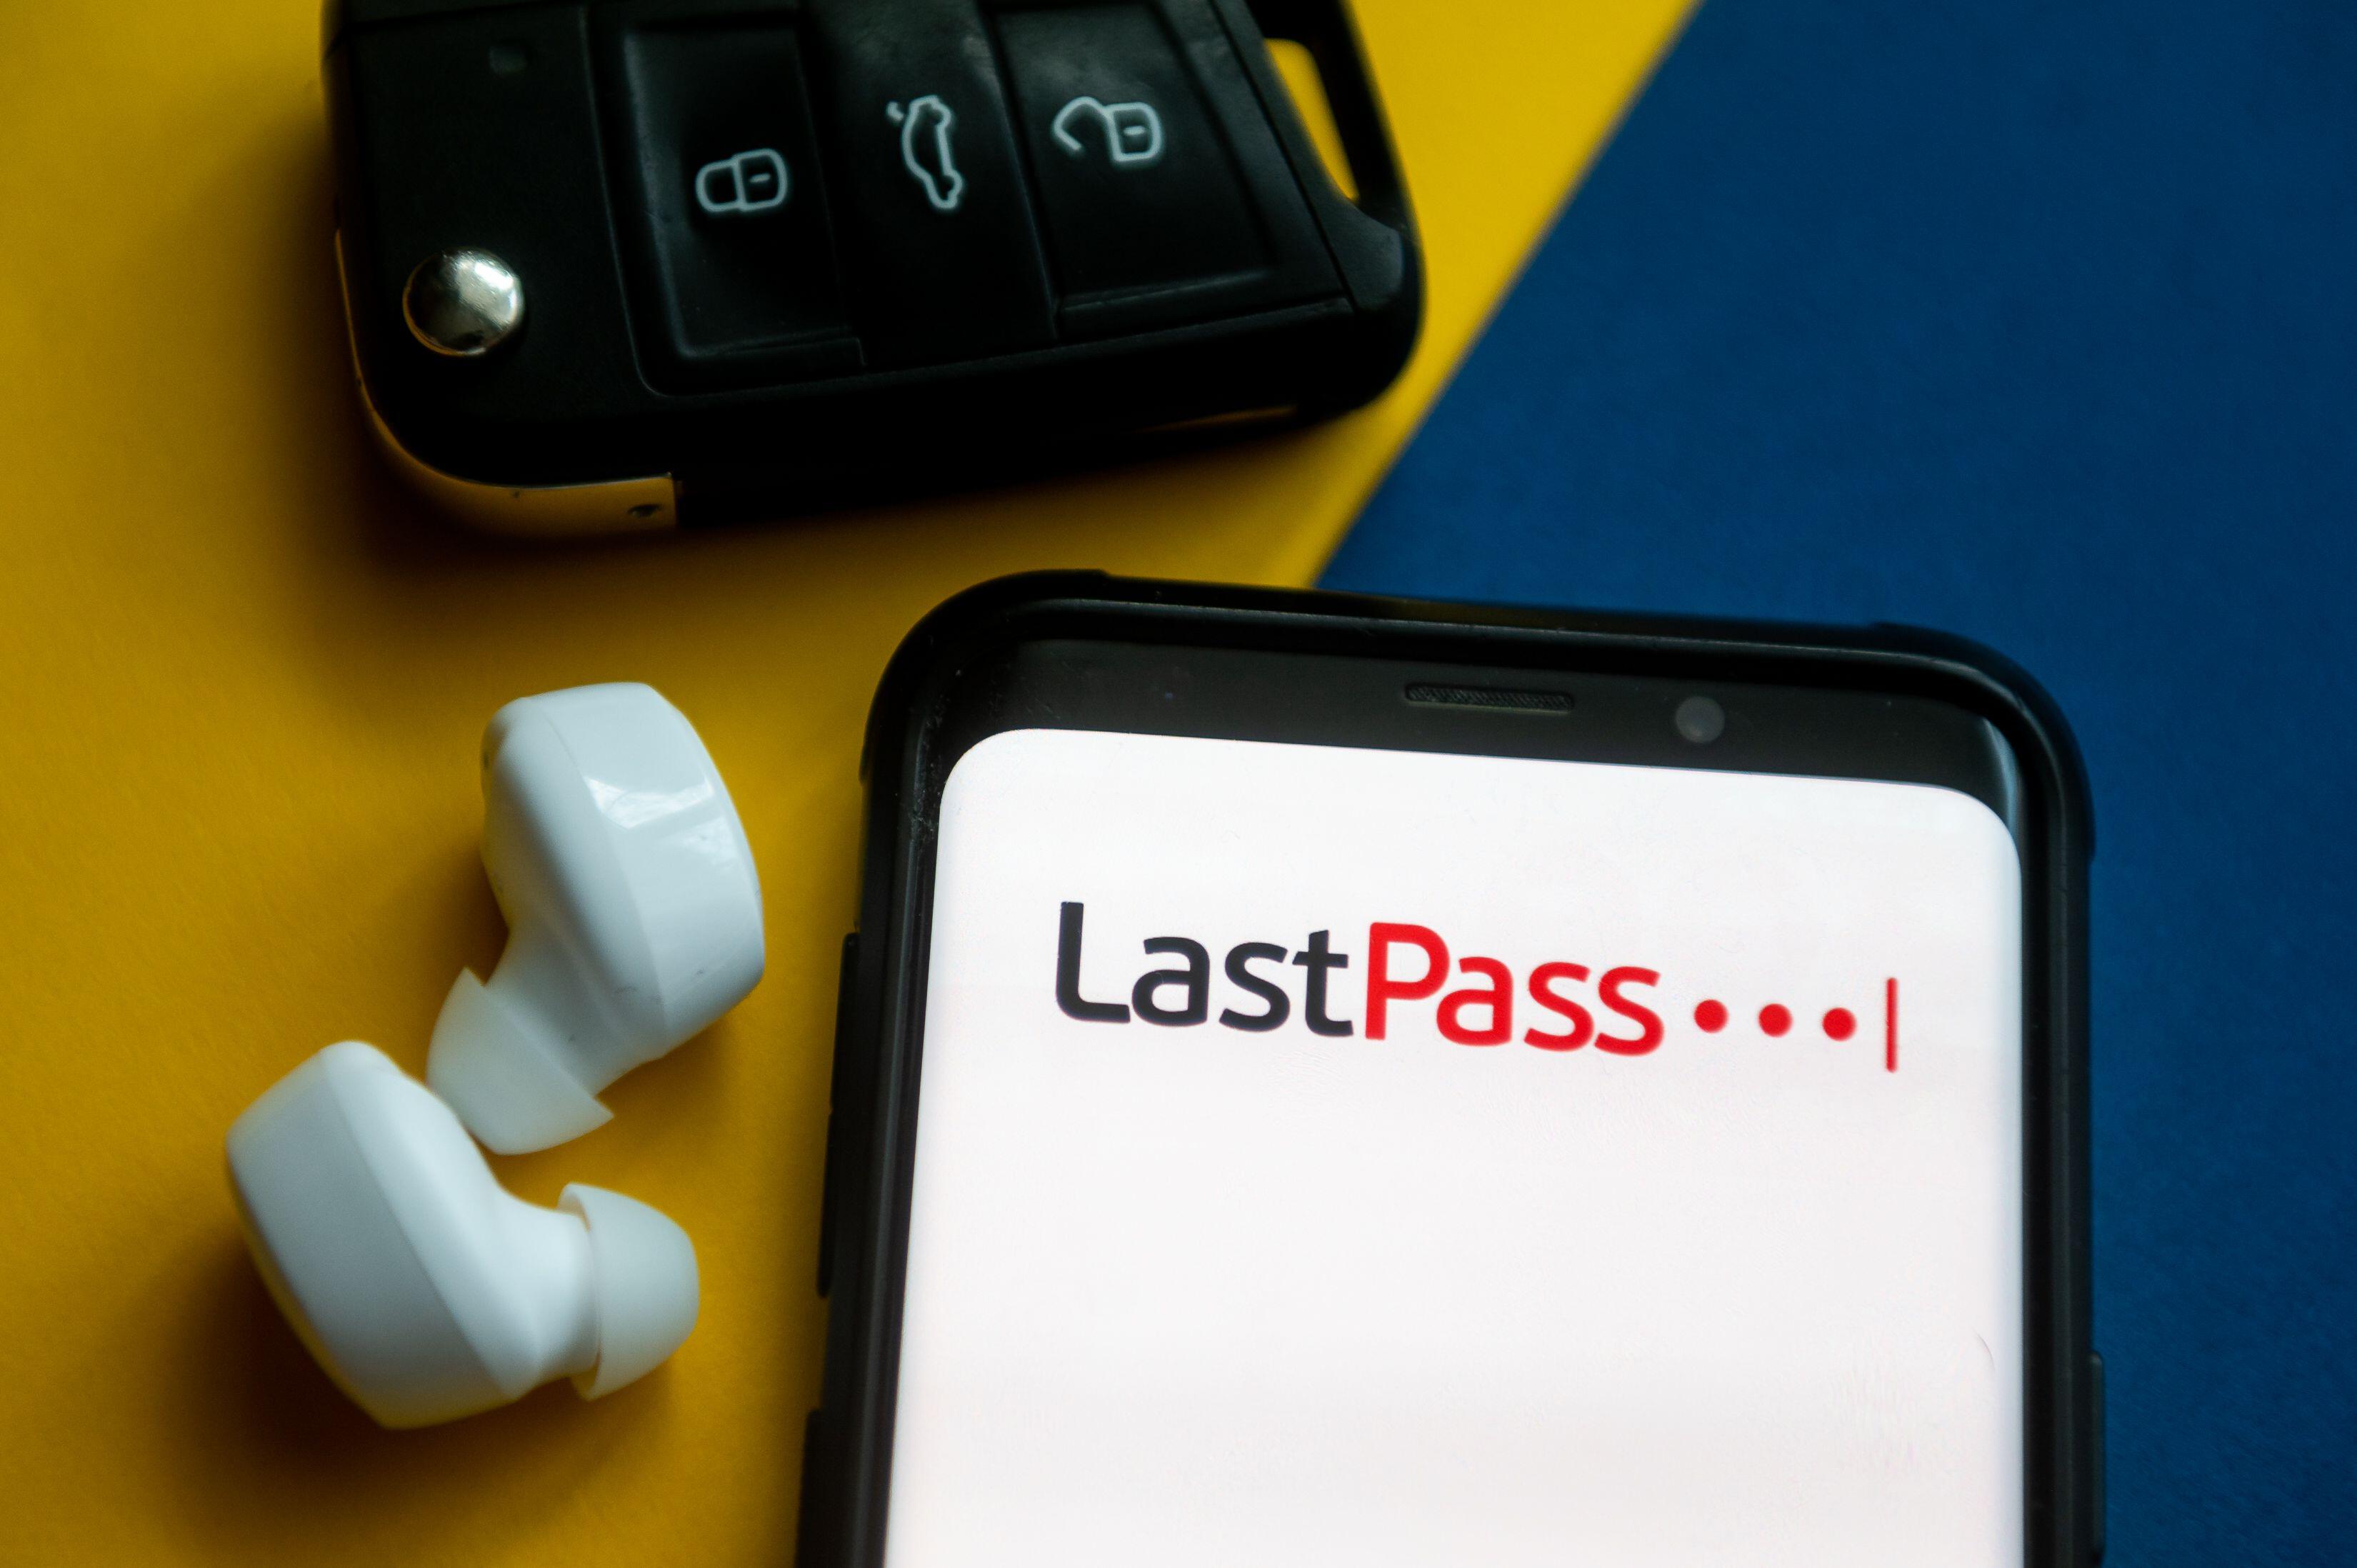 From Dark Reading – LastPass Hikes Password Requirements to 12 Characters